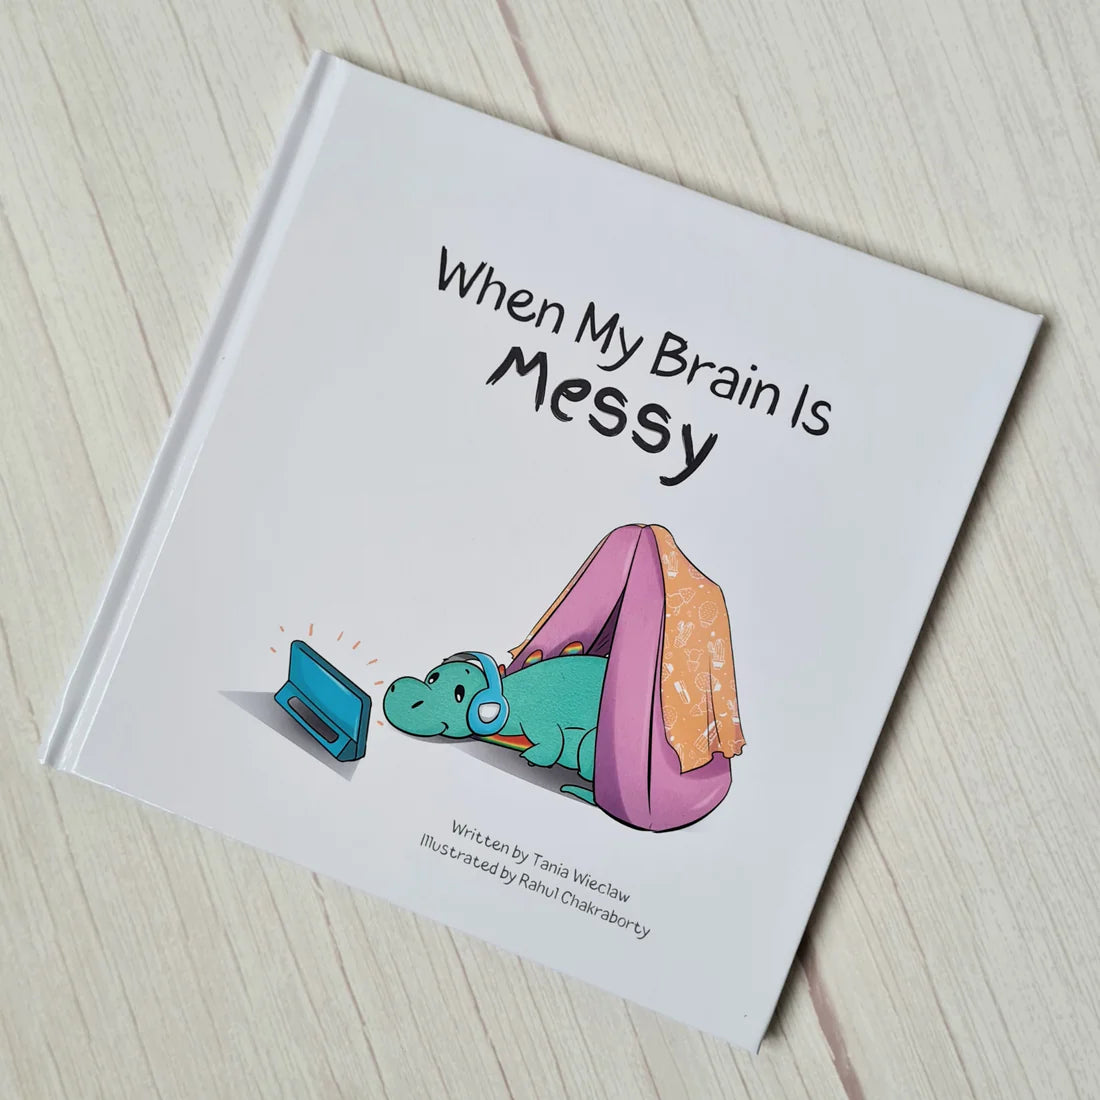 When_My_Brain_Is_Messy._A_Childrens_Picture_Book_about_Autism_and_Sensory_Processing_Differences_Tania_Wieclaw_page3